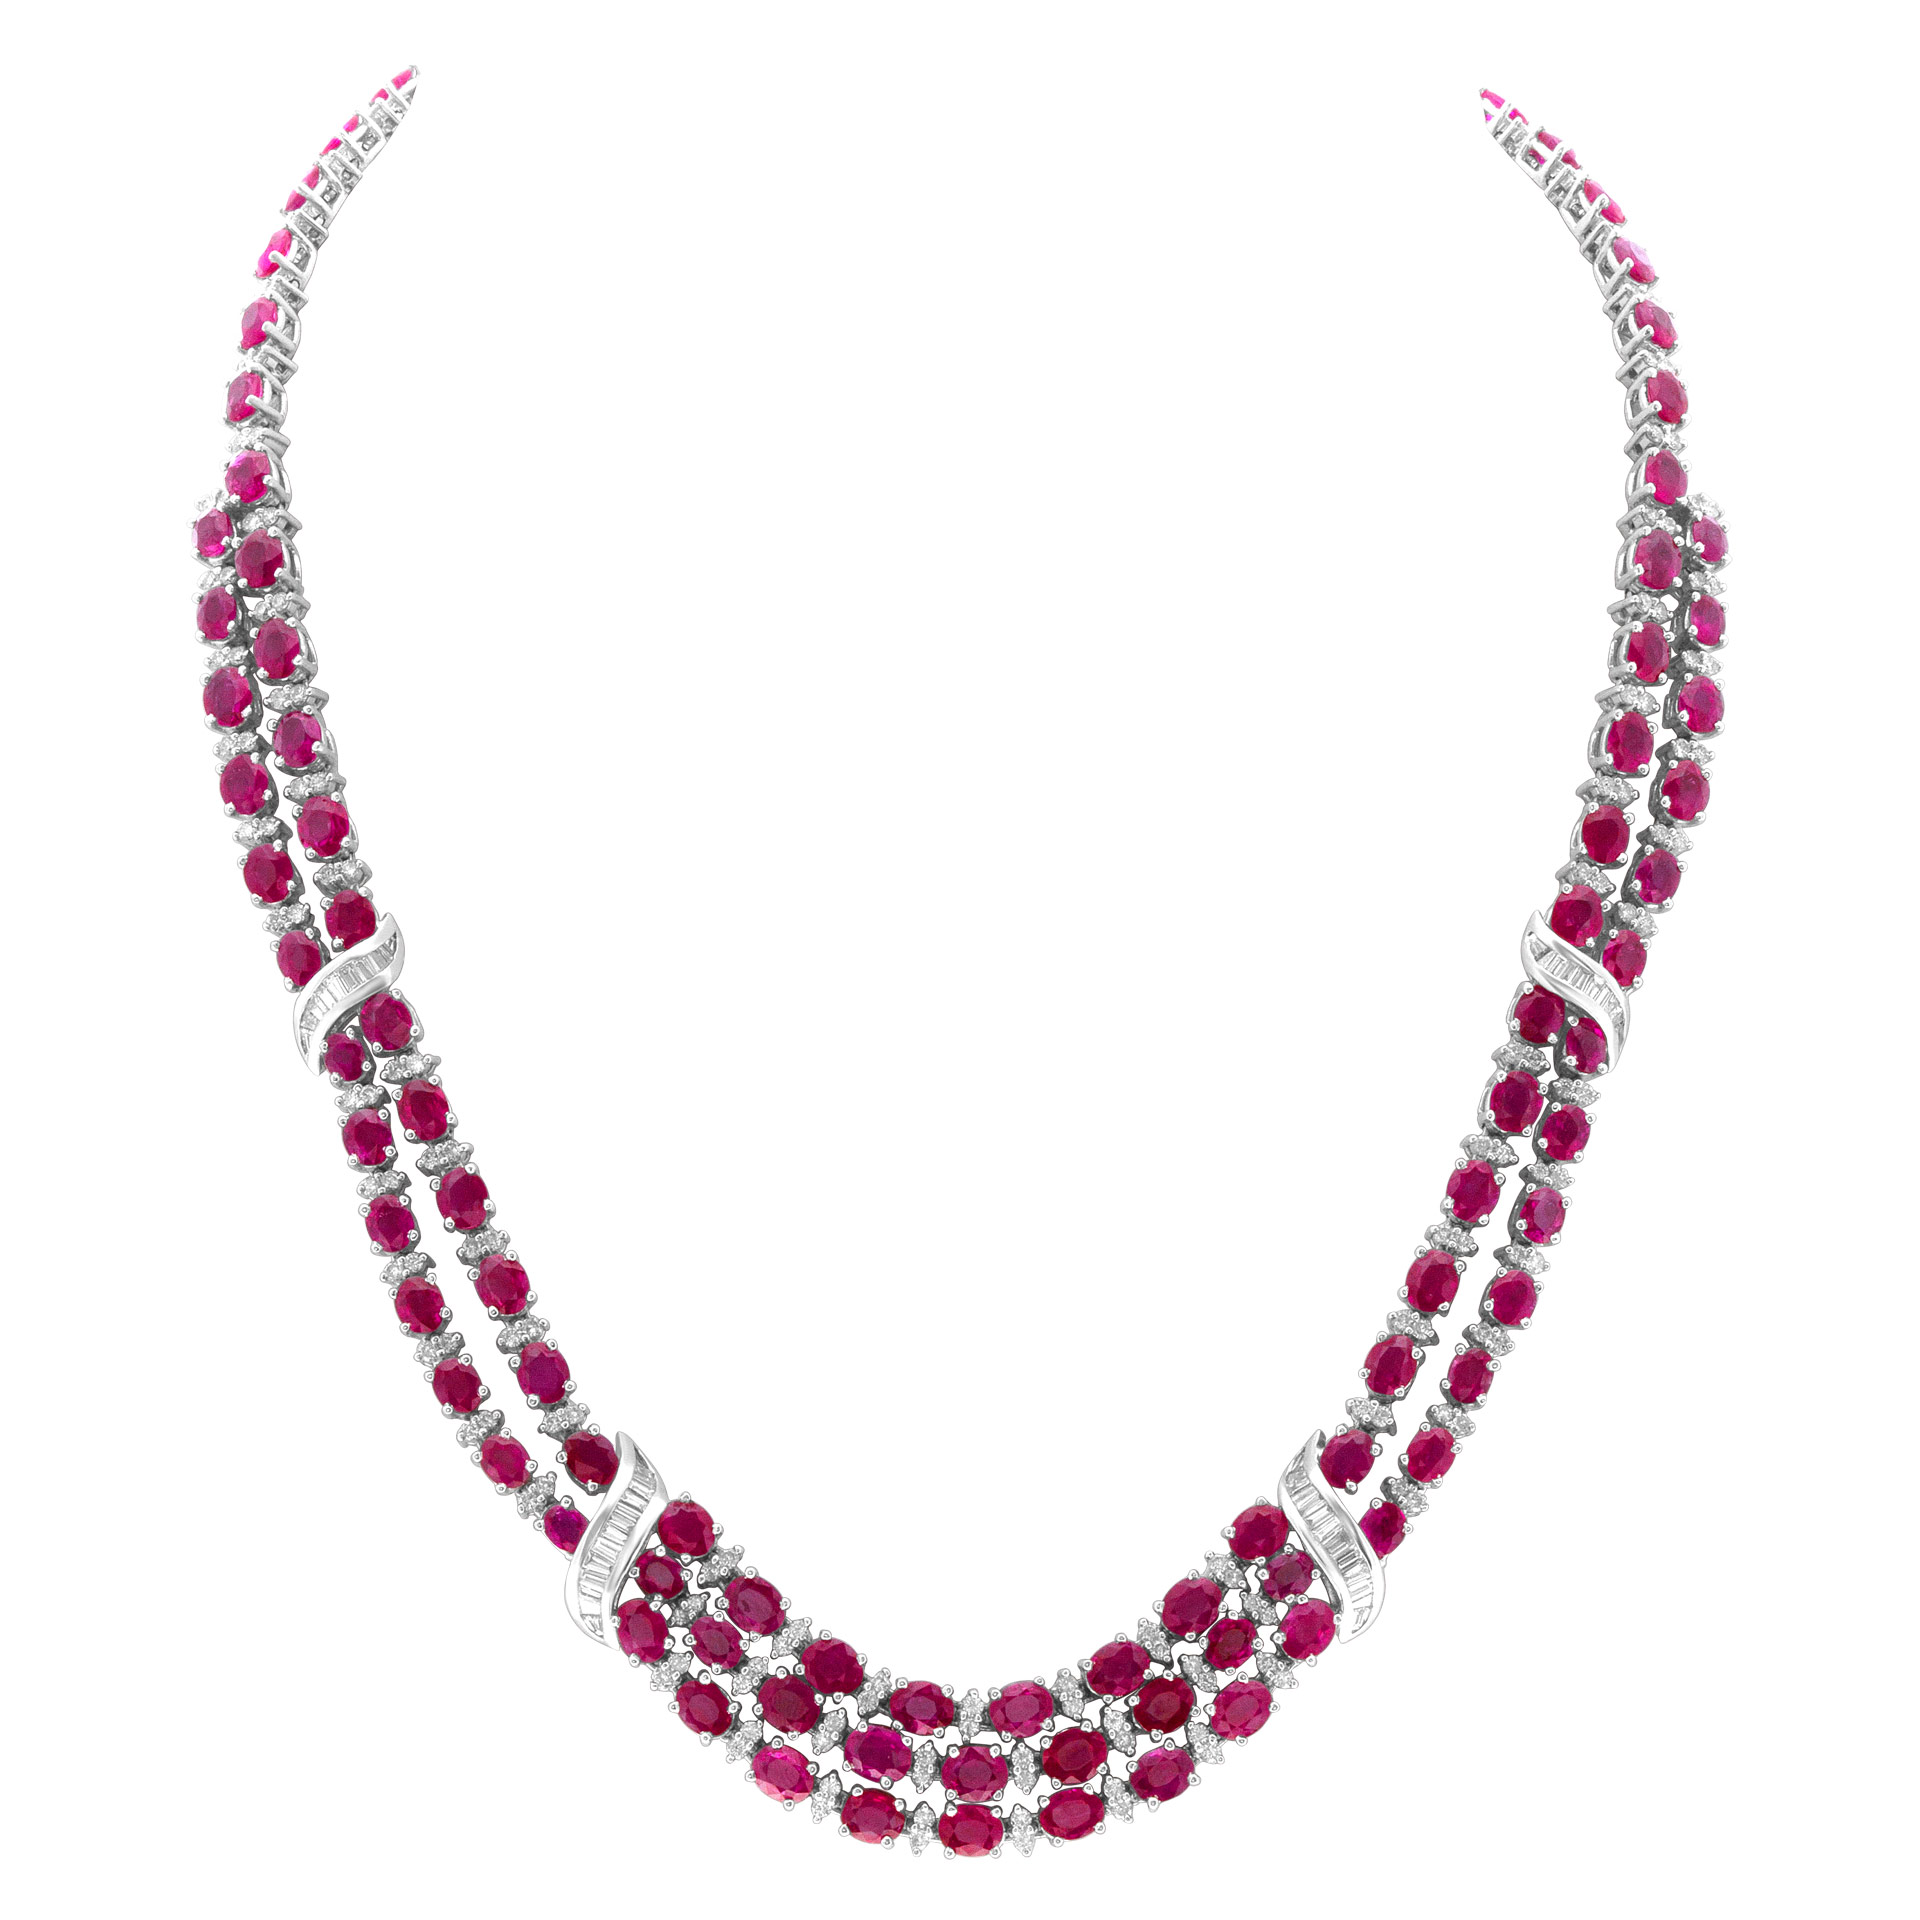 Stunning Ruby and diamond necklace